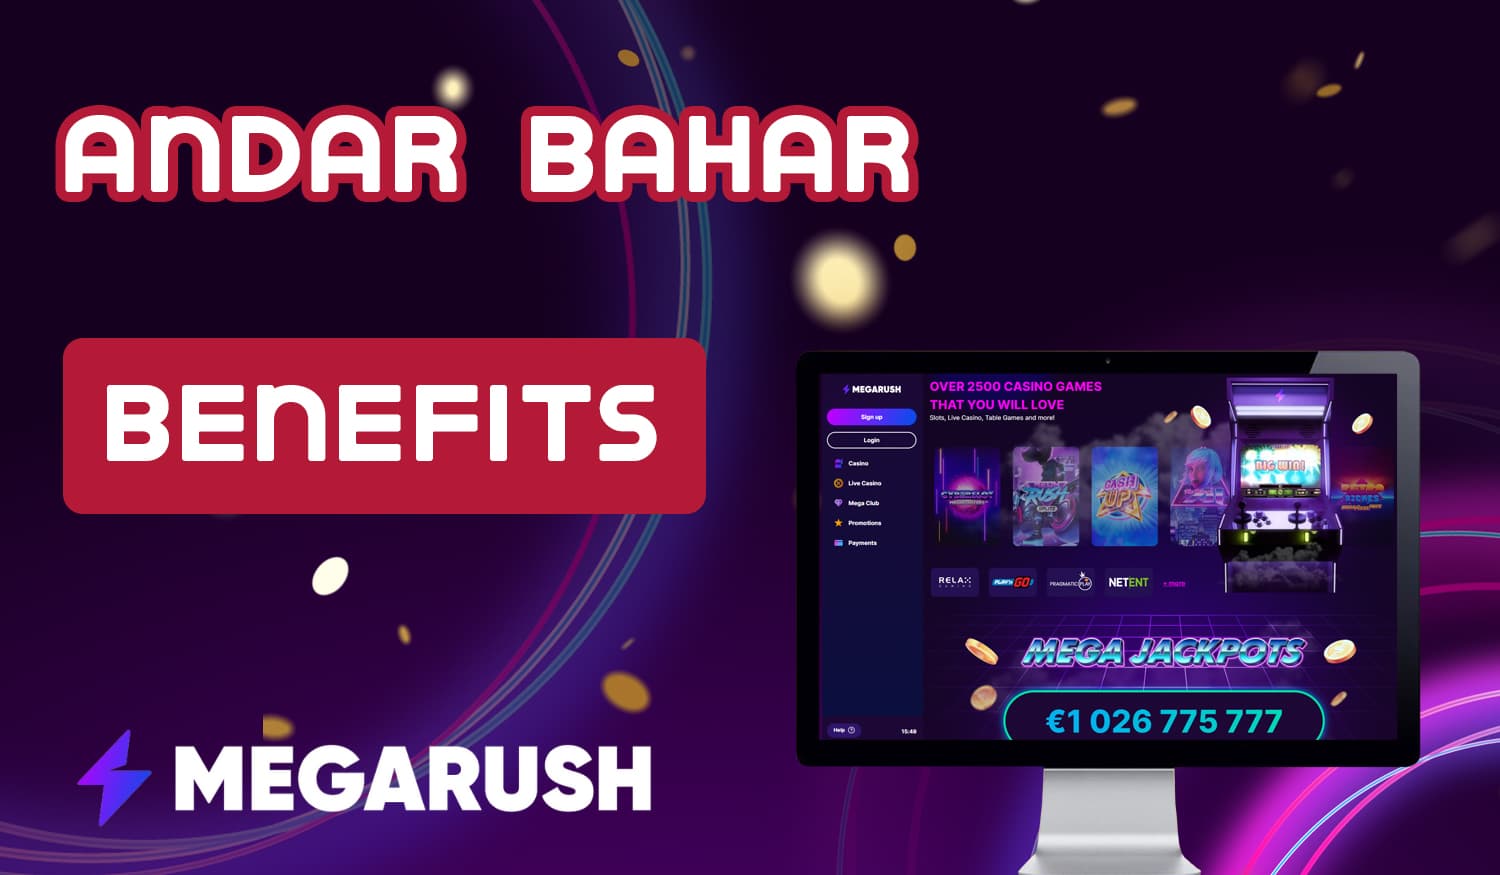 What are the benefits for playing Andar Bahar at the Megarush online casino site